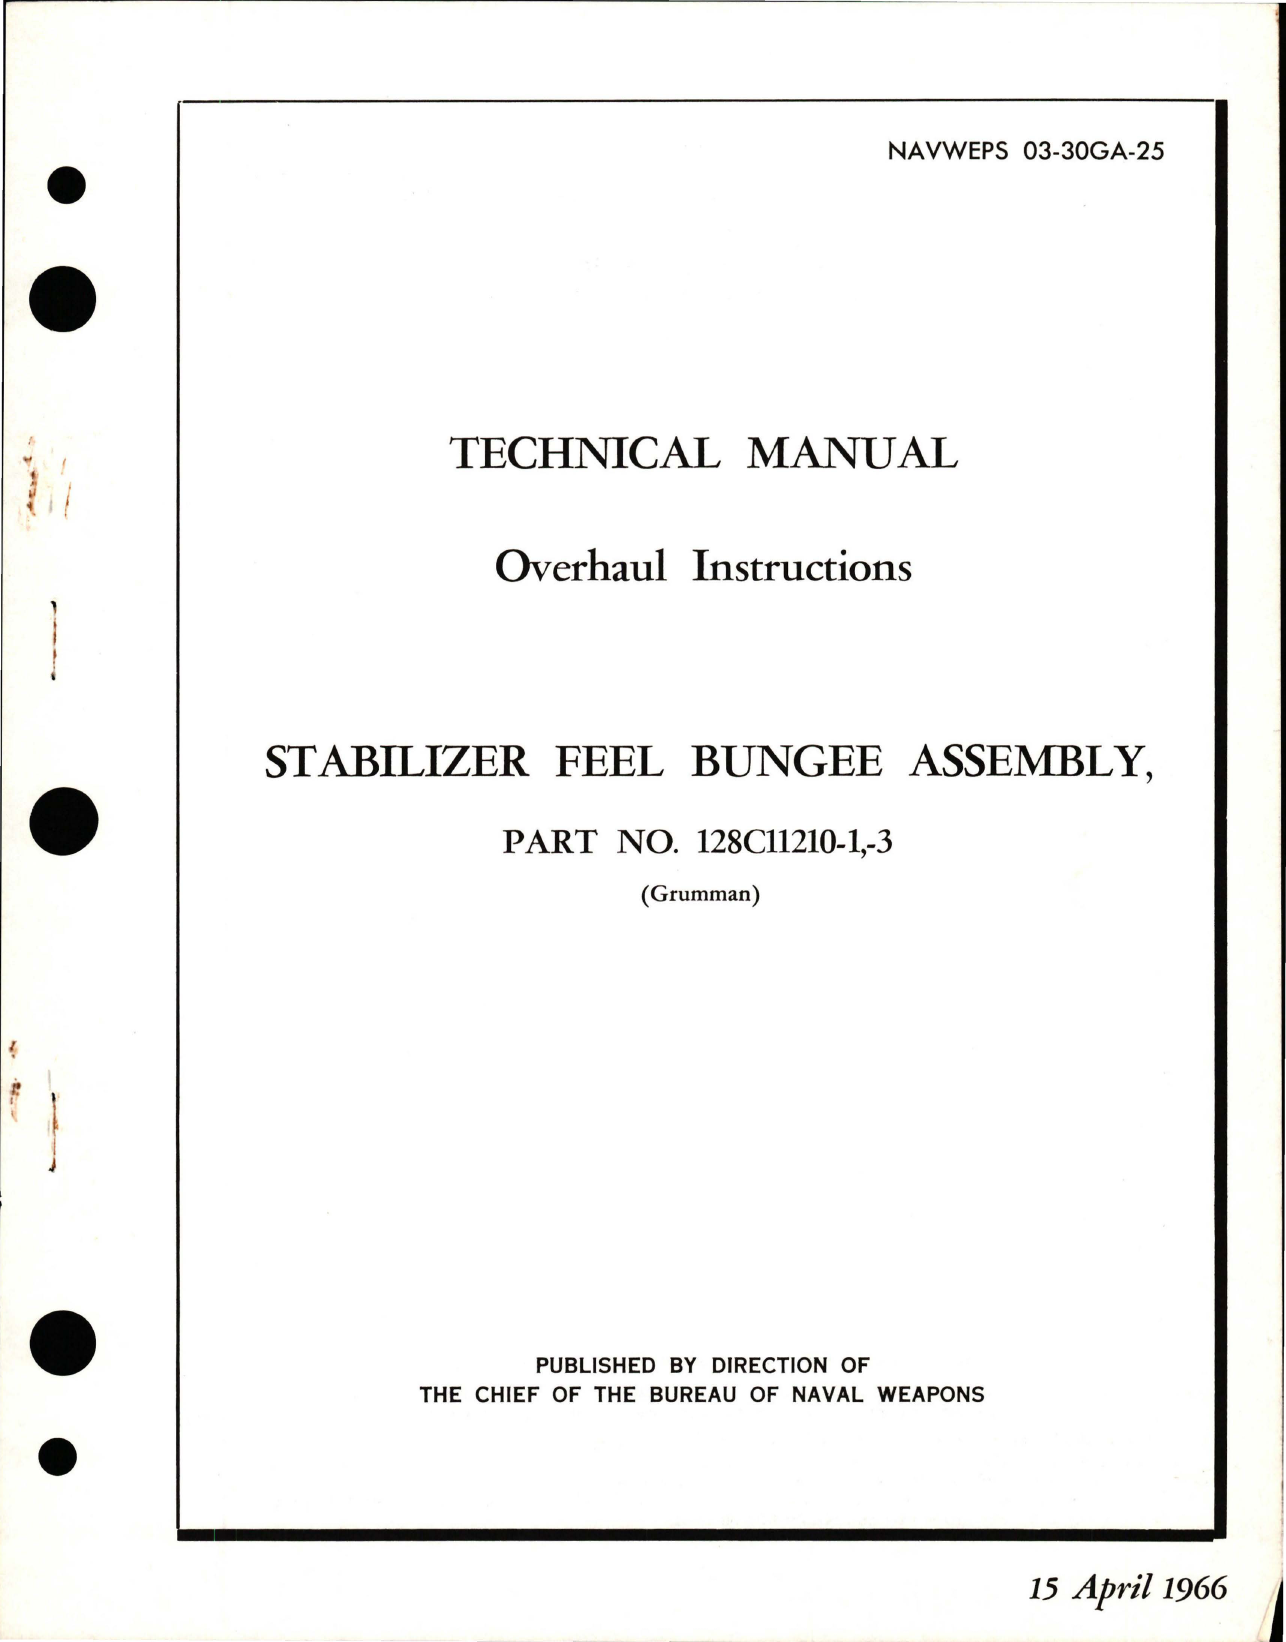 Sample page 1 from AirCorps Library document: Overhaul Instructions for Stabilizer Feel Bungee Assy - Part 128C11210-1 and 128C11210-3 